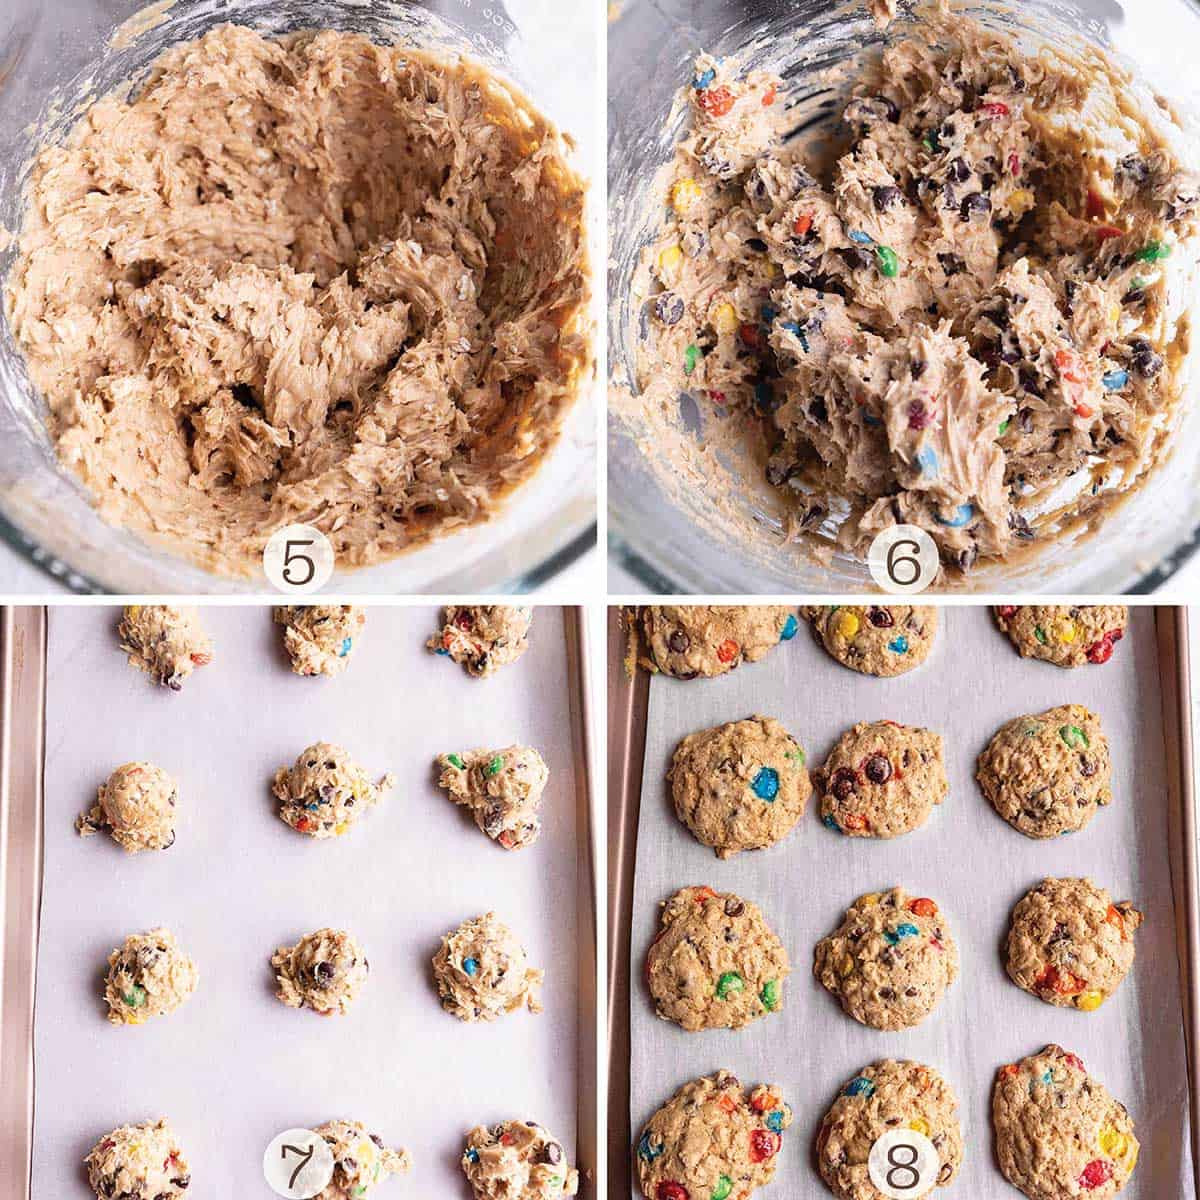 Cookie batter in a stand mixer then cookies scooped out on parchment then baked. 